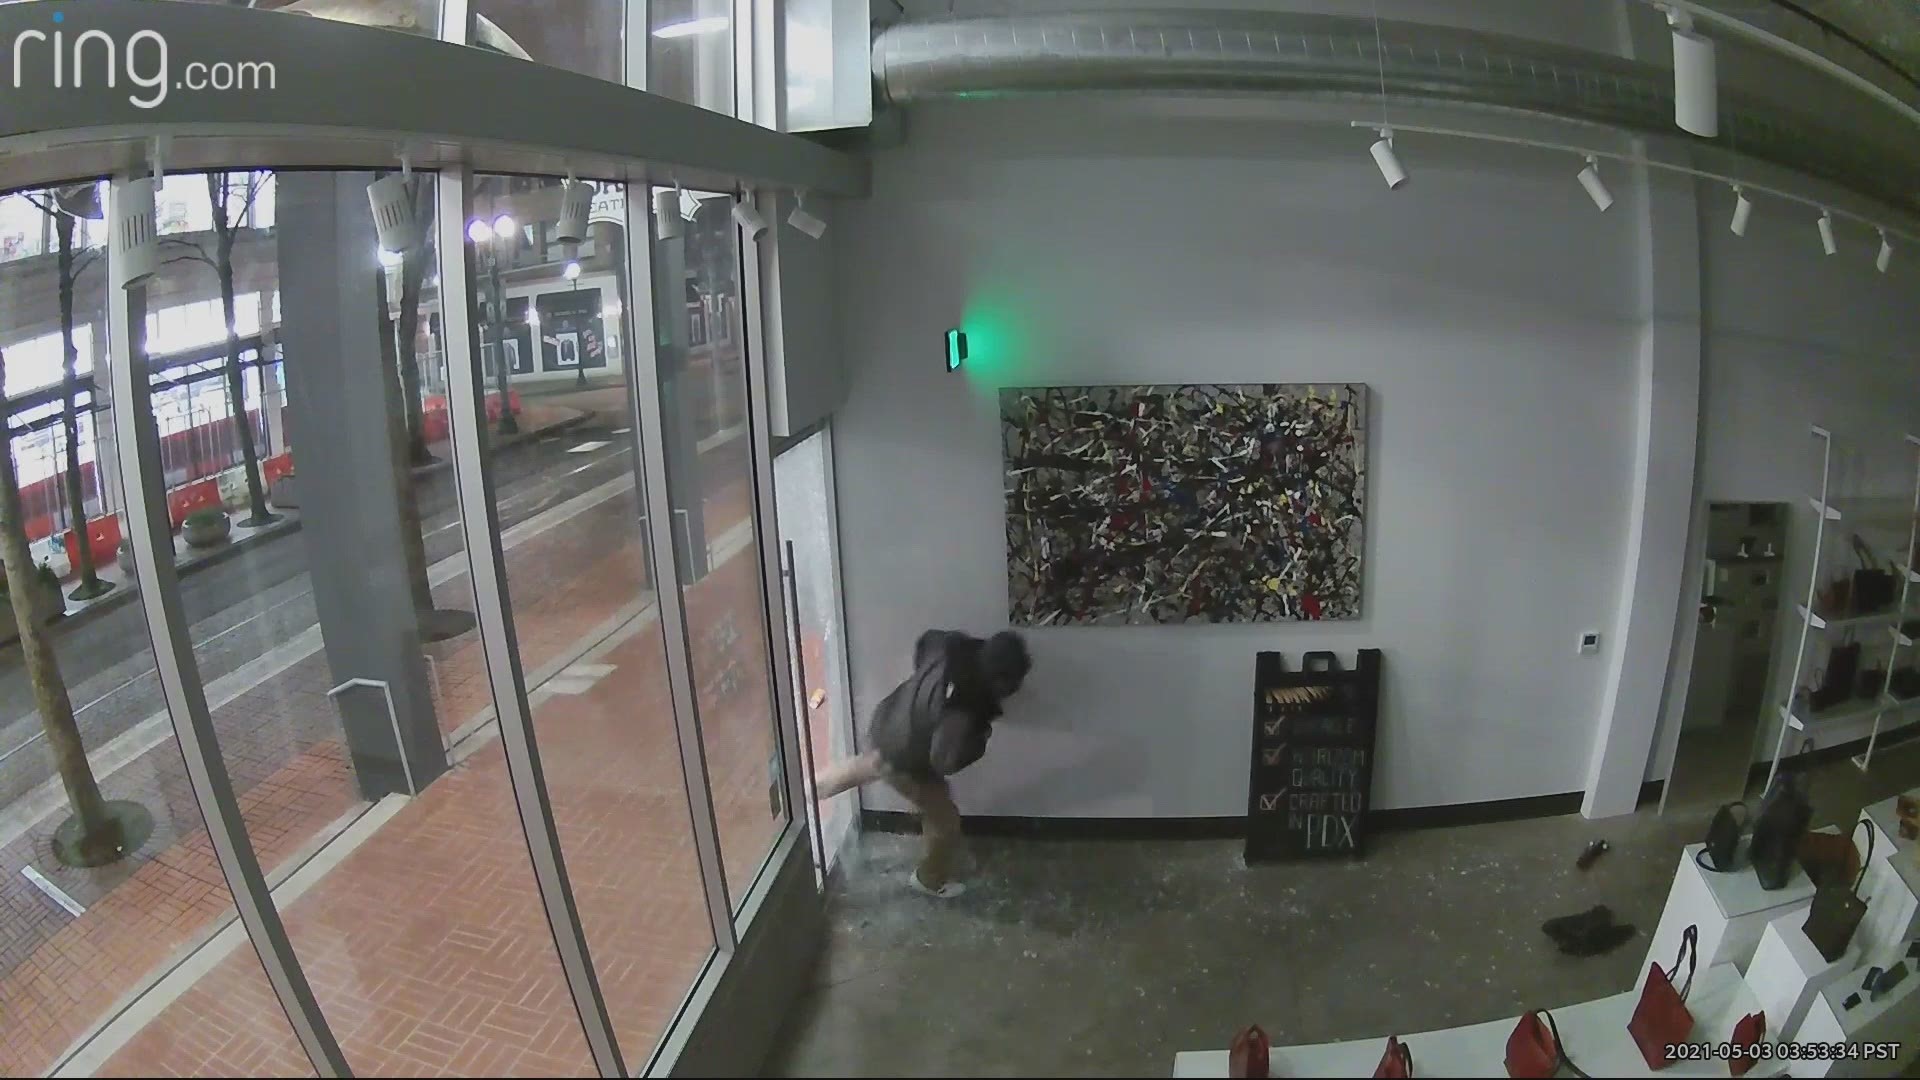 The second burglary in two months at Orox Leather Co. at Southwest Morrison Street and 10th Avenue was caught on camera early Friday morning